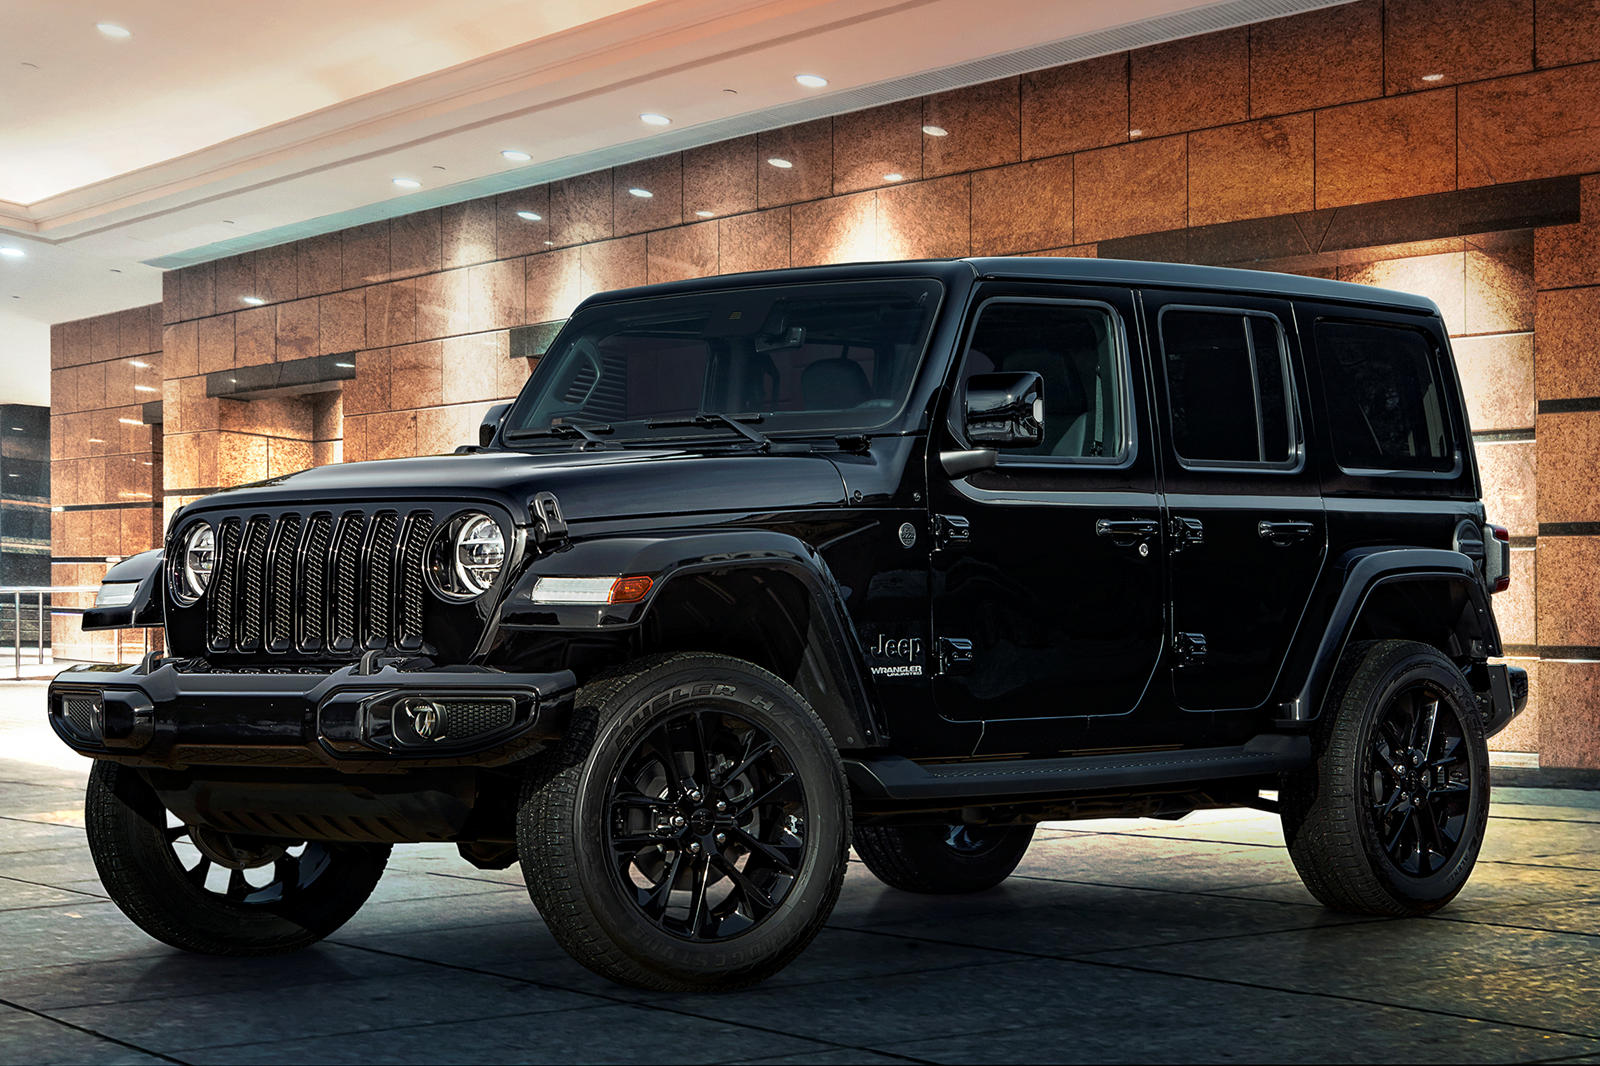 2021 Jeep Wrangler 4xe debuts with two electric motors